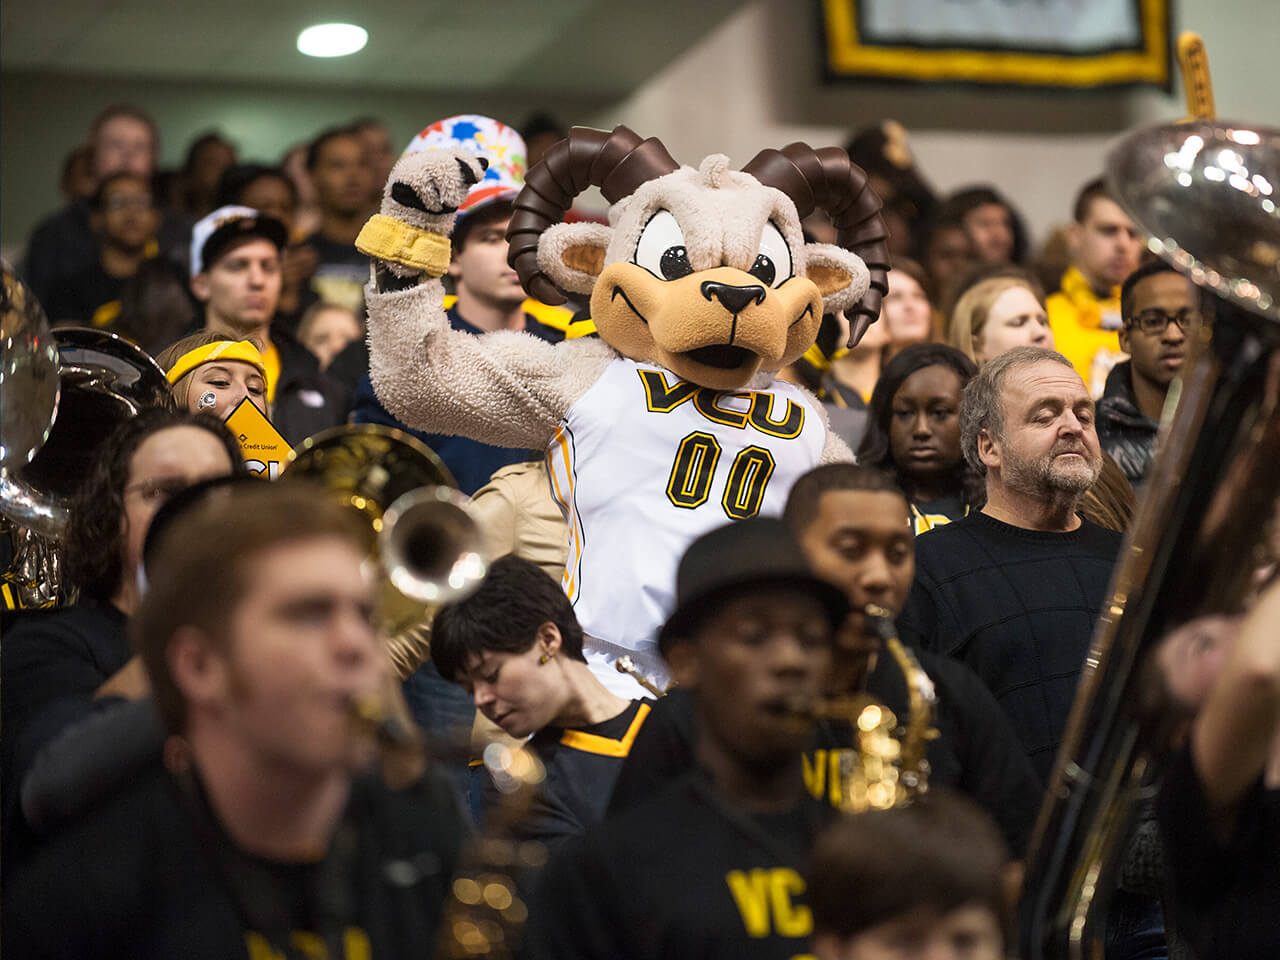 Mascot Rodney the Ram in a crowd at a sporting event